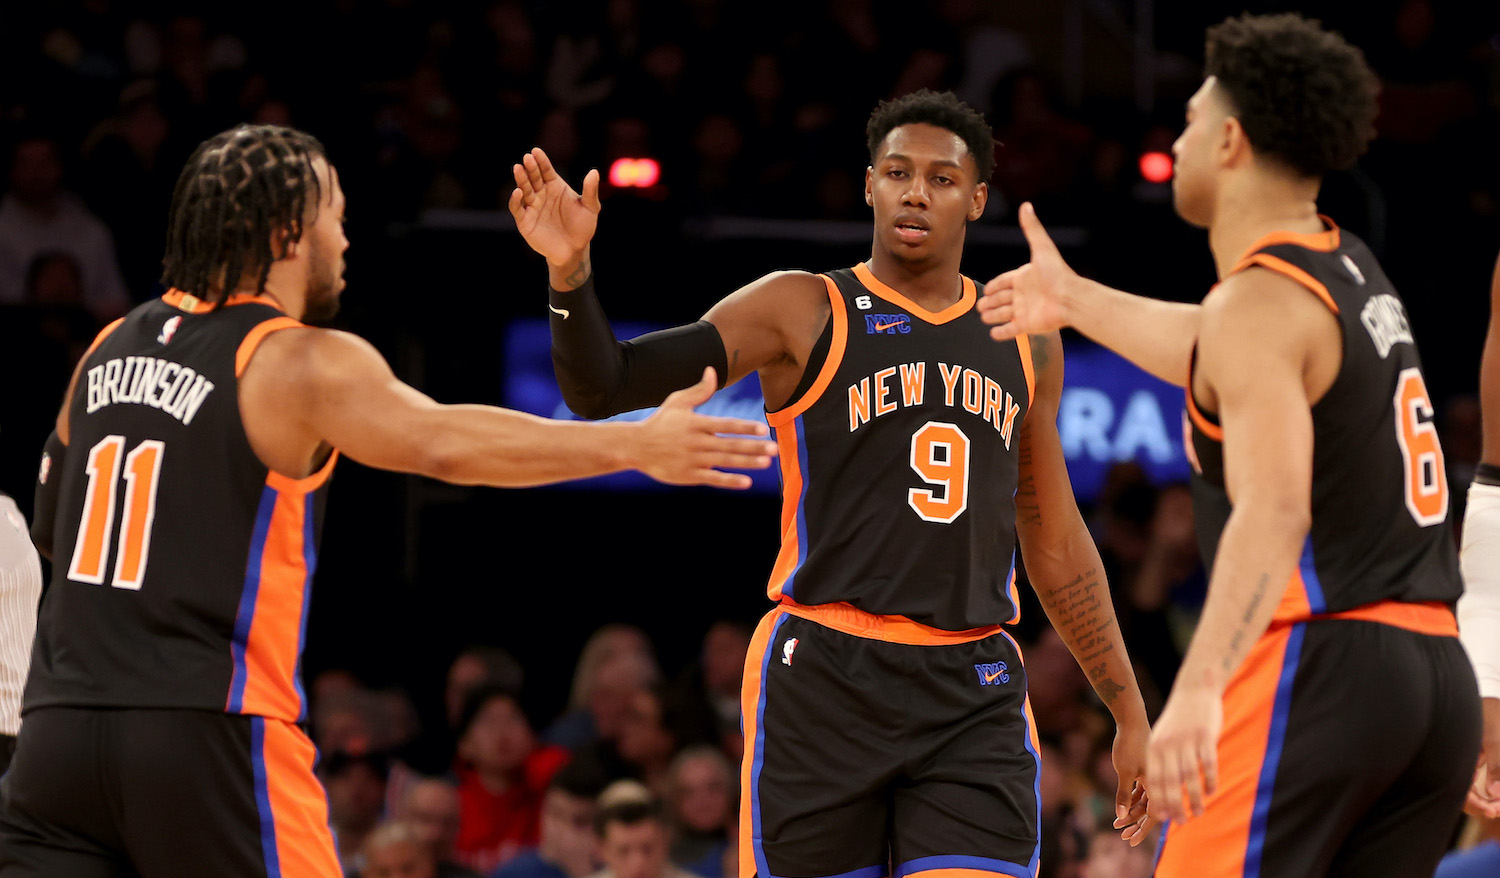 NEW YORK, NEW YORK - DECEMBER 20: Jalen Brunson #11, RJ Barrett #9 and Quentin Grimes #6 of the New York Knicks celebrate a basket against the Golden State Warriors during the second quarter of the game at Madison Square Garden on December 20, 2022 in New York City. NOTE TO USER: User expressly acknowledges and agrees that, by downloading and/or using this photograph, User is consenting to the terms and conditions of the Getty Images License Agreement. (Photo by Sarah Stier/Getty Images)